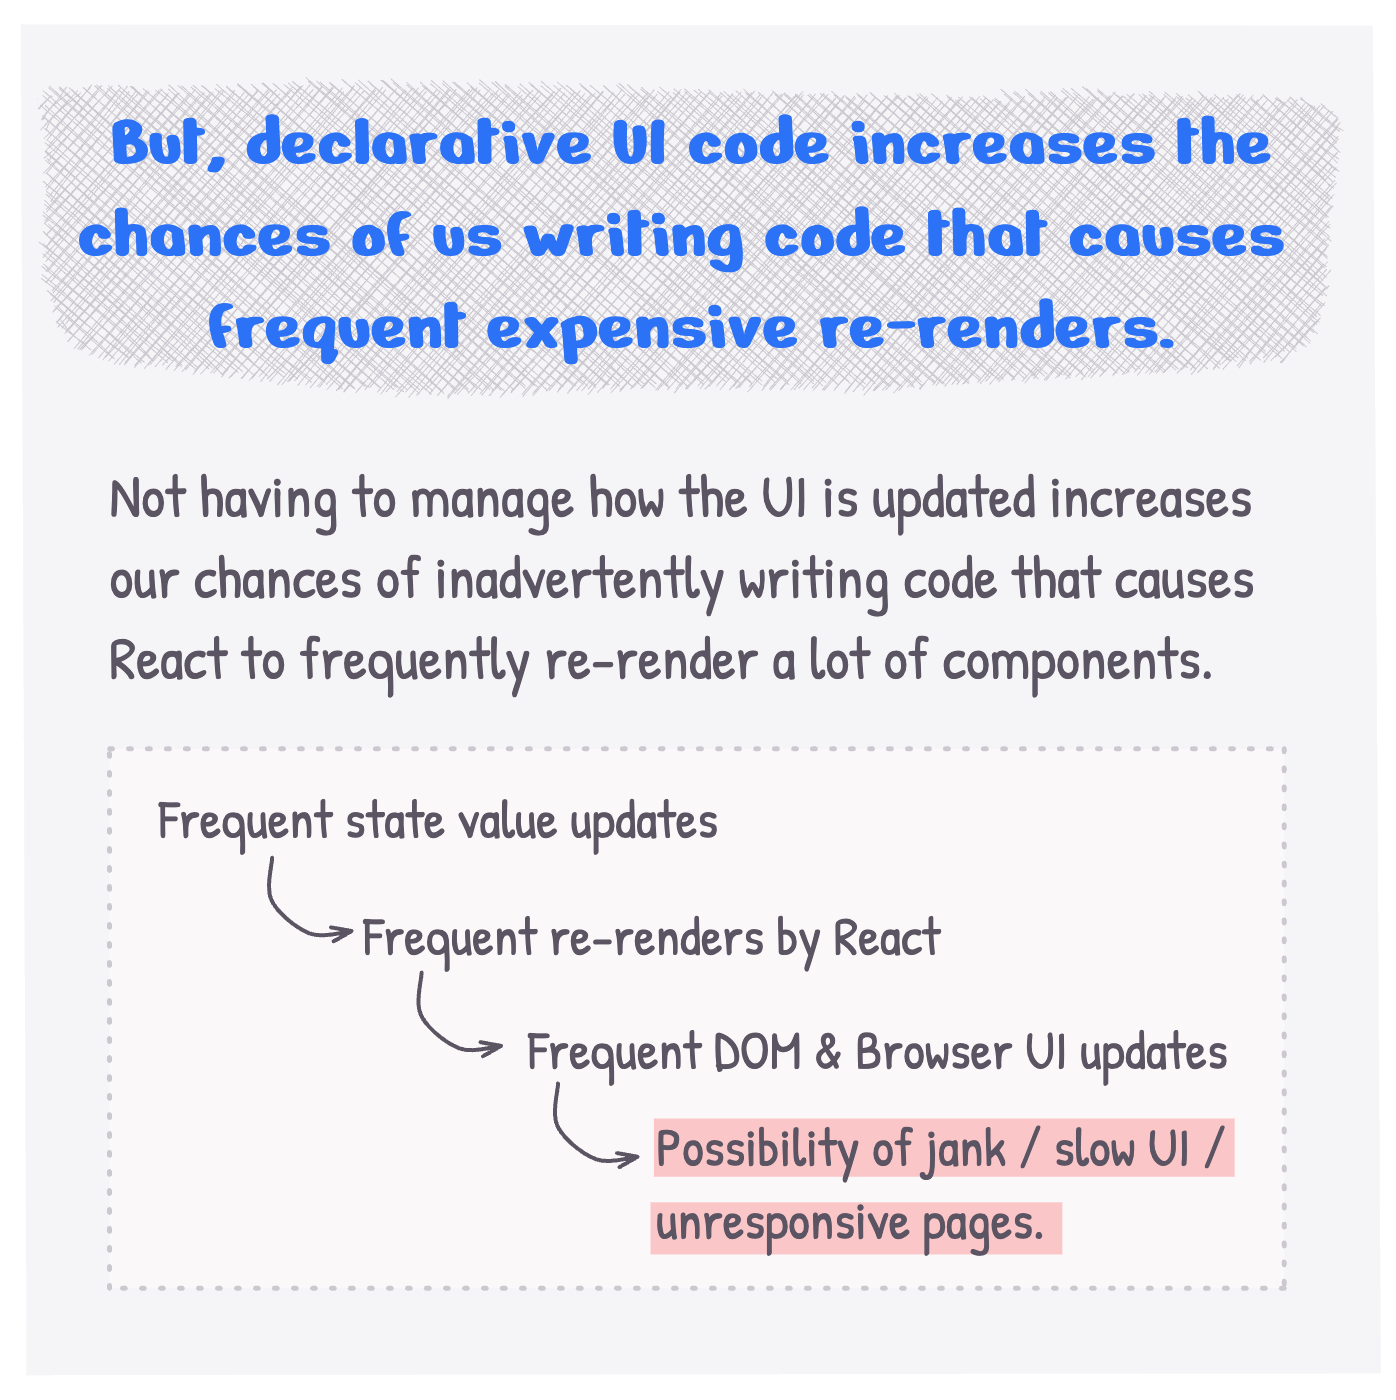 But, declarative UI code increases the chances of us writing code that causes frequent expensive re-renders. Not having to manage how the UI is updated increases our chances of inadvertently writing code that causes React to frequently re-render a lot of components.